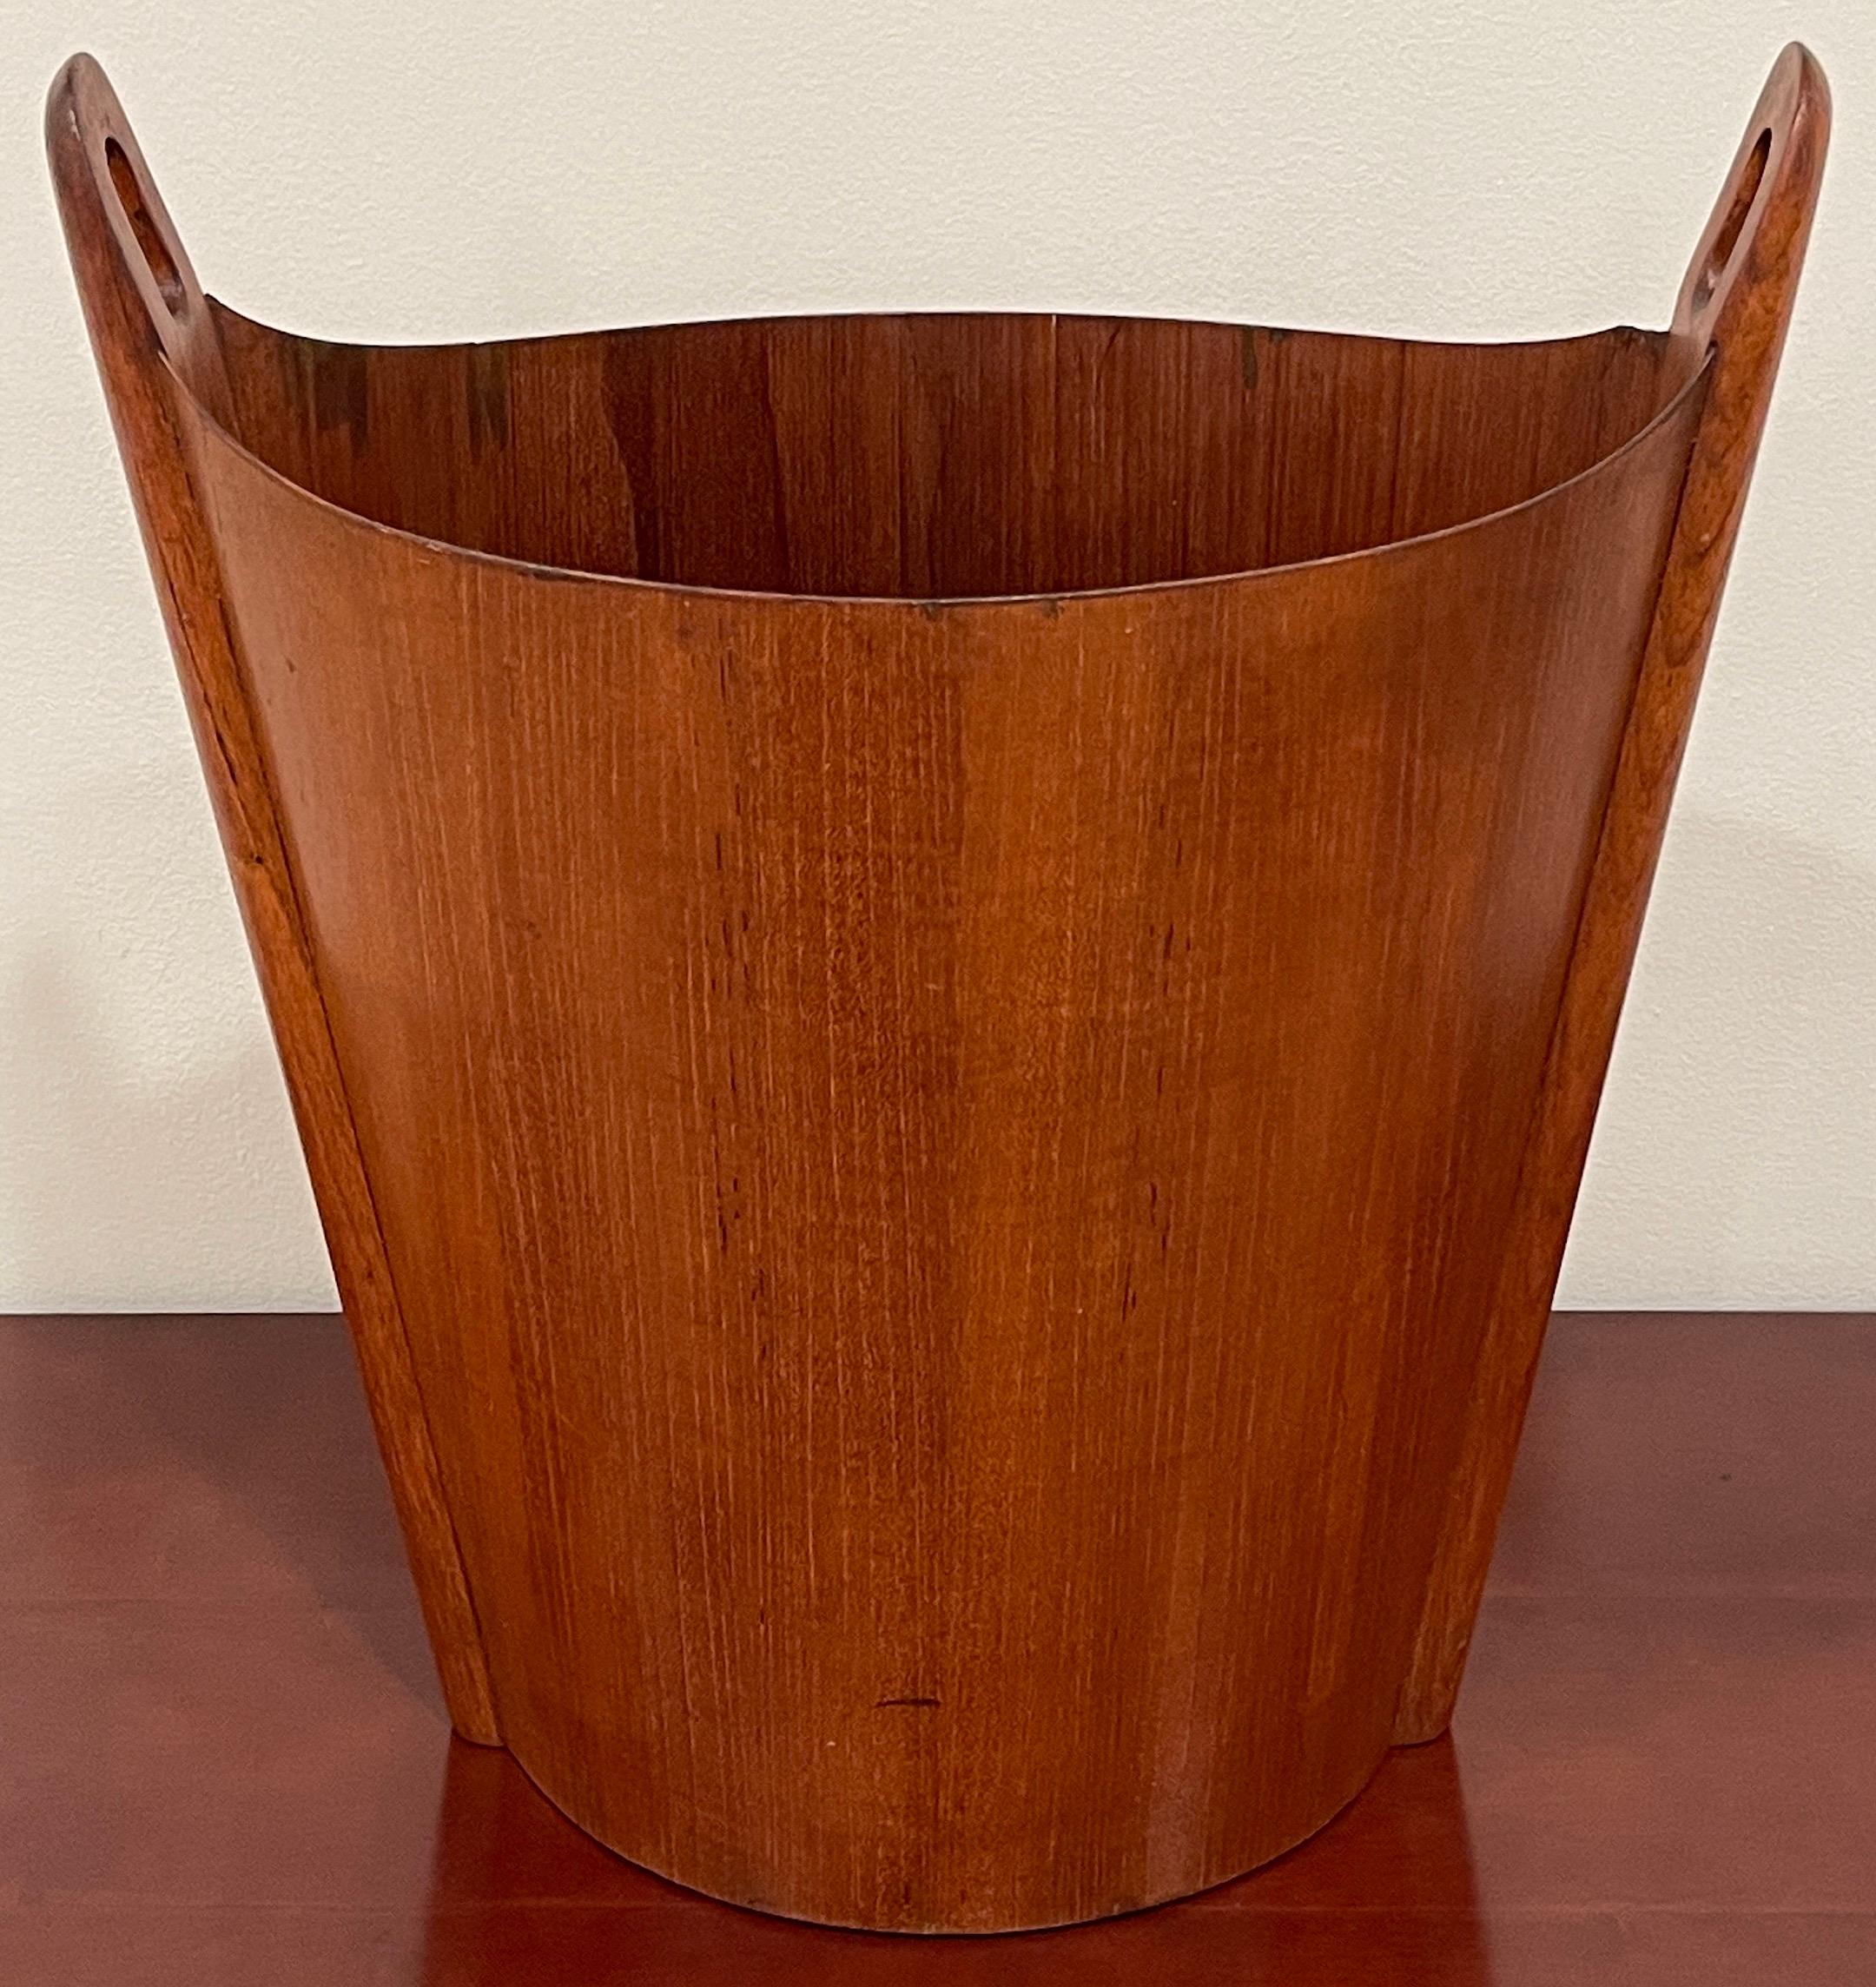 Danish Modern Einar Barnes for P.S. Heggen teak wastepaper basket 
A fine example of sculpted teak waste paper basket designed by Einar Barnes and manufactured by P. S. Heggen in an oval shape with loops at both ends supported by tapering columns,